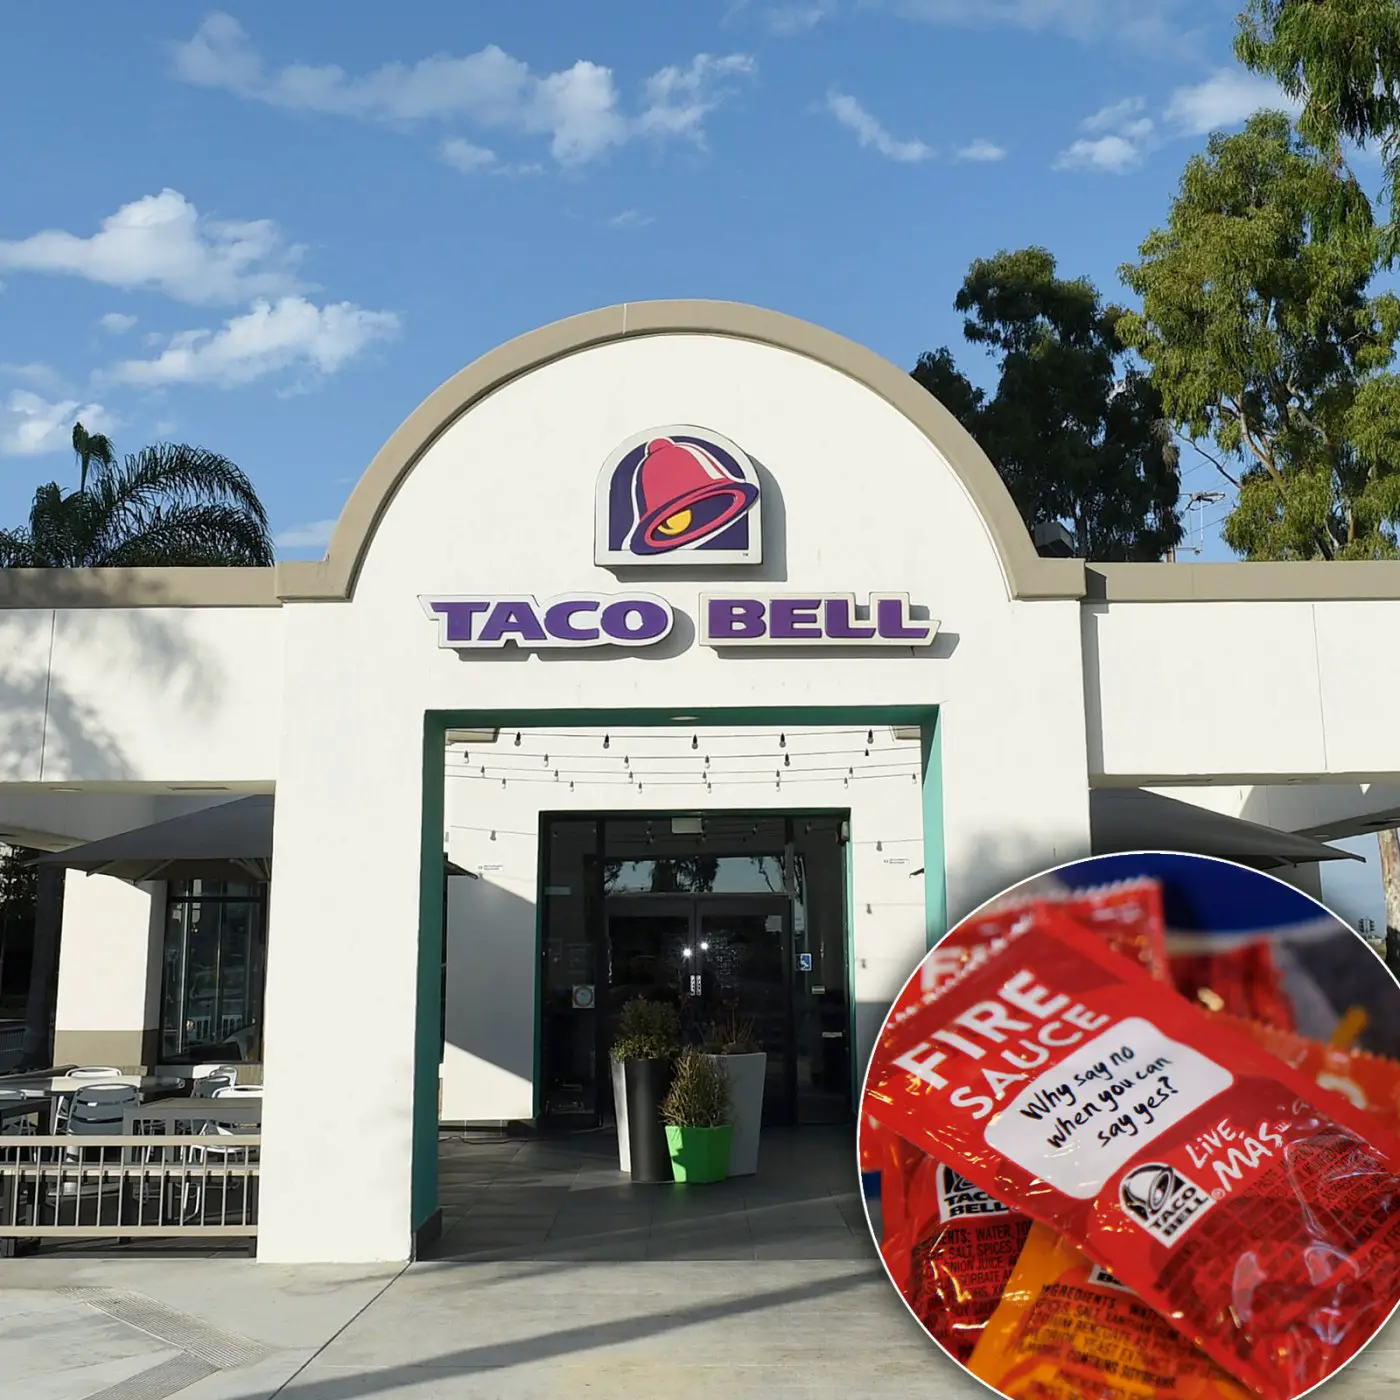 Man Stranded in Snow for 5 Days Survived on Taco Bell Sauce Packets